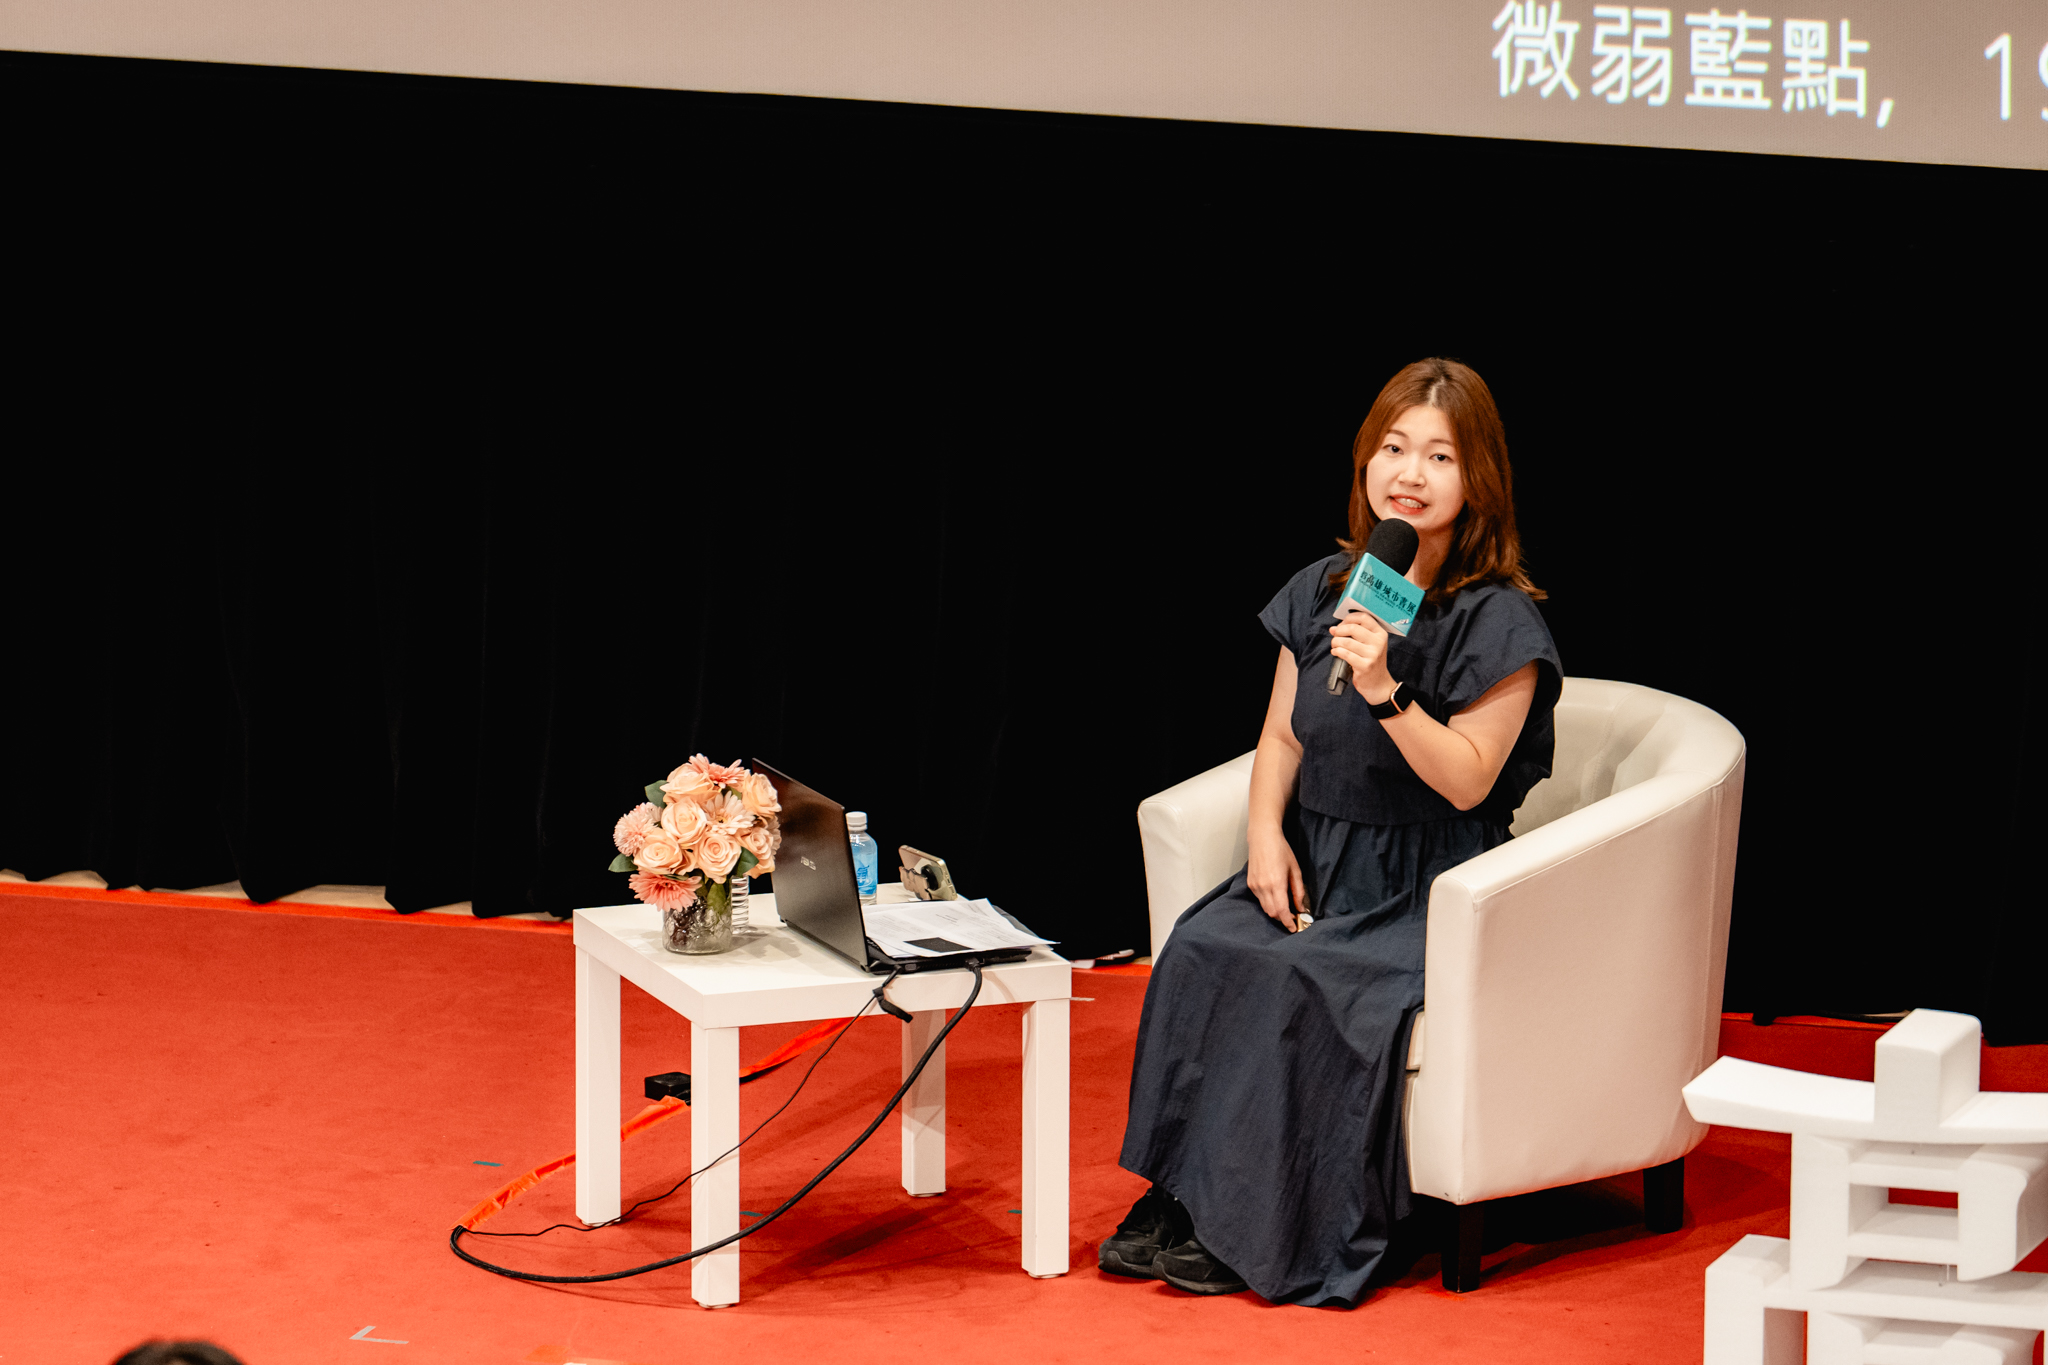 Kim Choyeop (金草葉, 김초엽) shared the sci-fi world with the people of Kaohsiung at the "2023 Kaohsiung Reading Festival" today (November 12th) at the Kaohsiung Municipal Library Main Branch, under the theme "Science Fiction, How to Meet Other Worlds." This event also marked her first meet-and-greet in Taiwan, held in Kaohsiung.